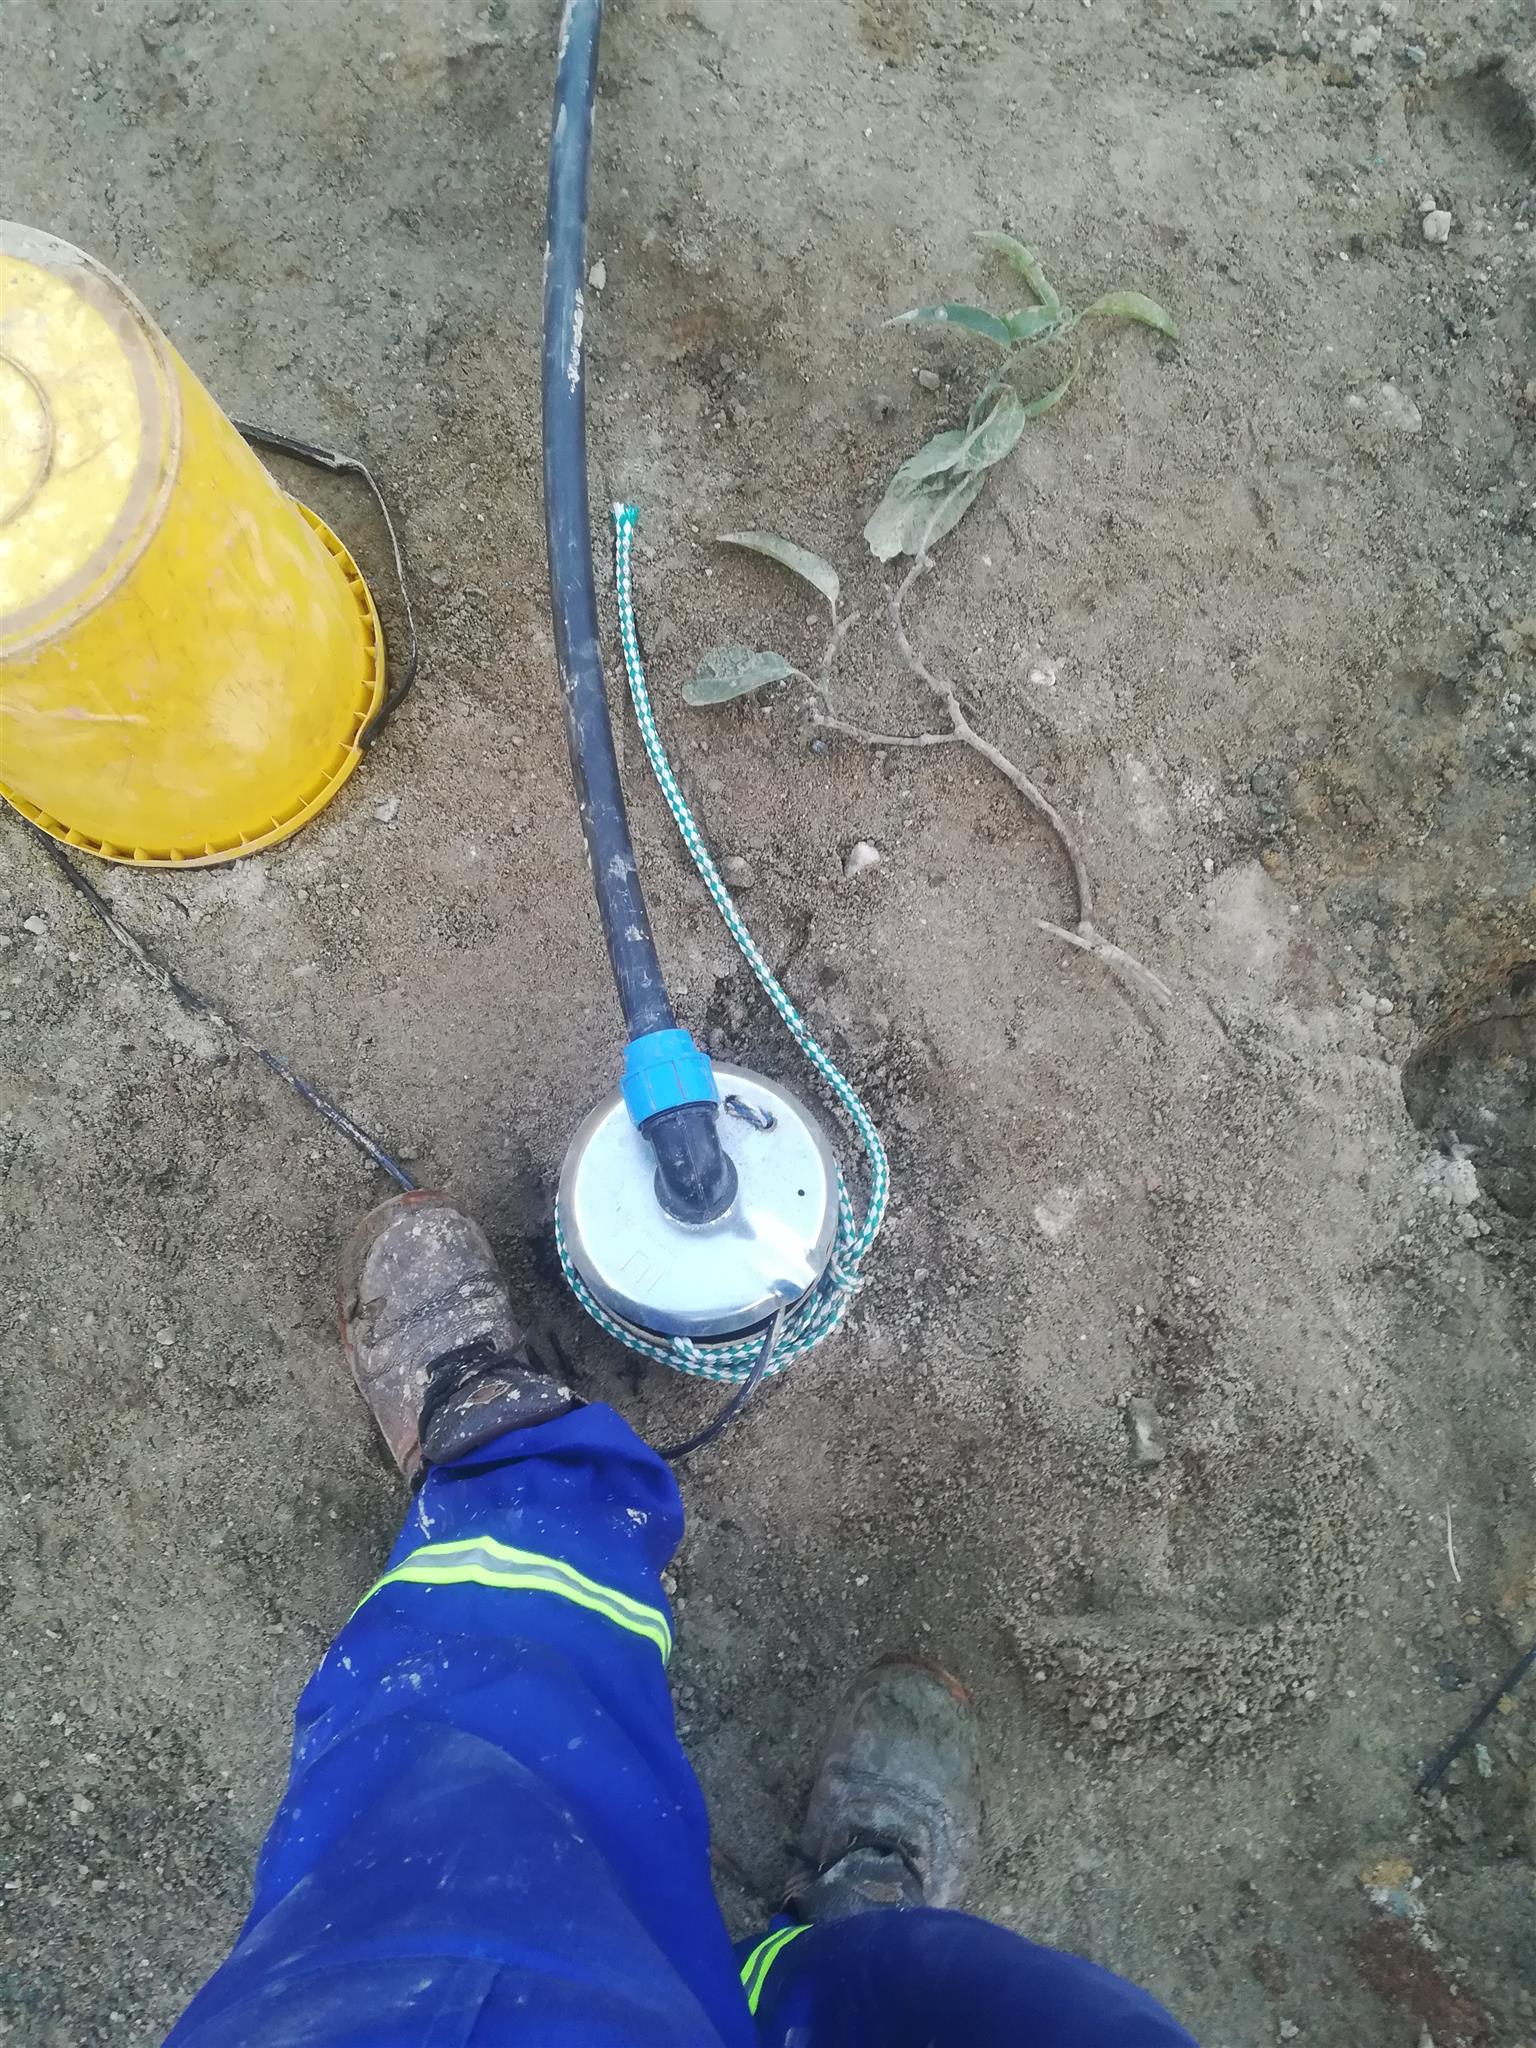 Borehole drilling , pvc , pump installation, water survey Steel casing, water 